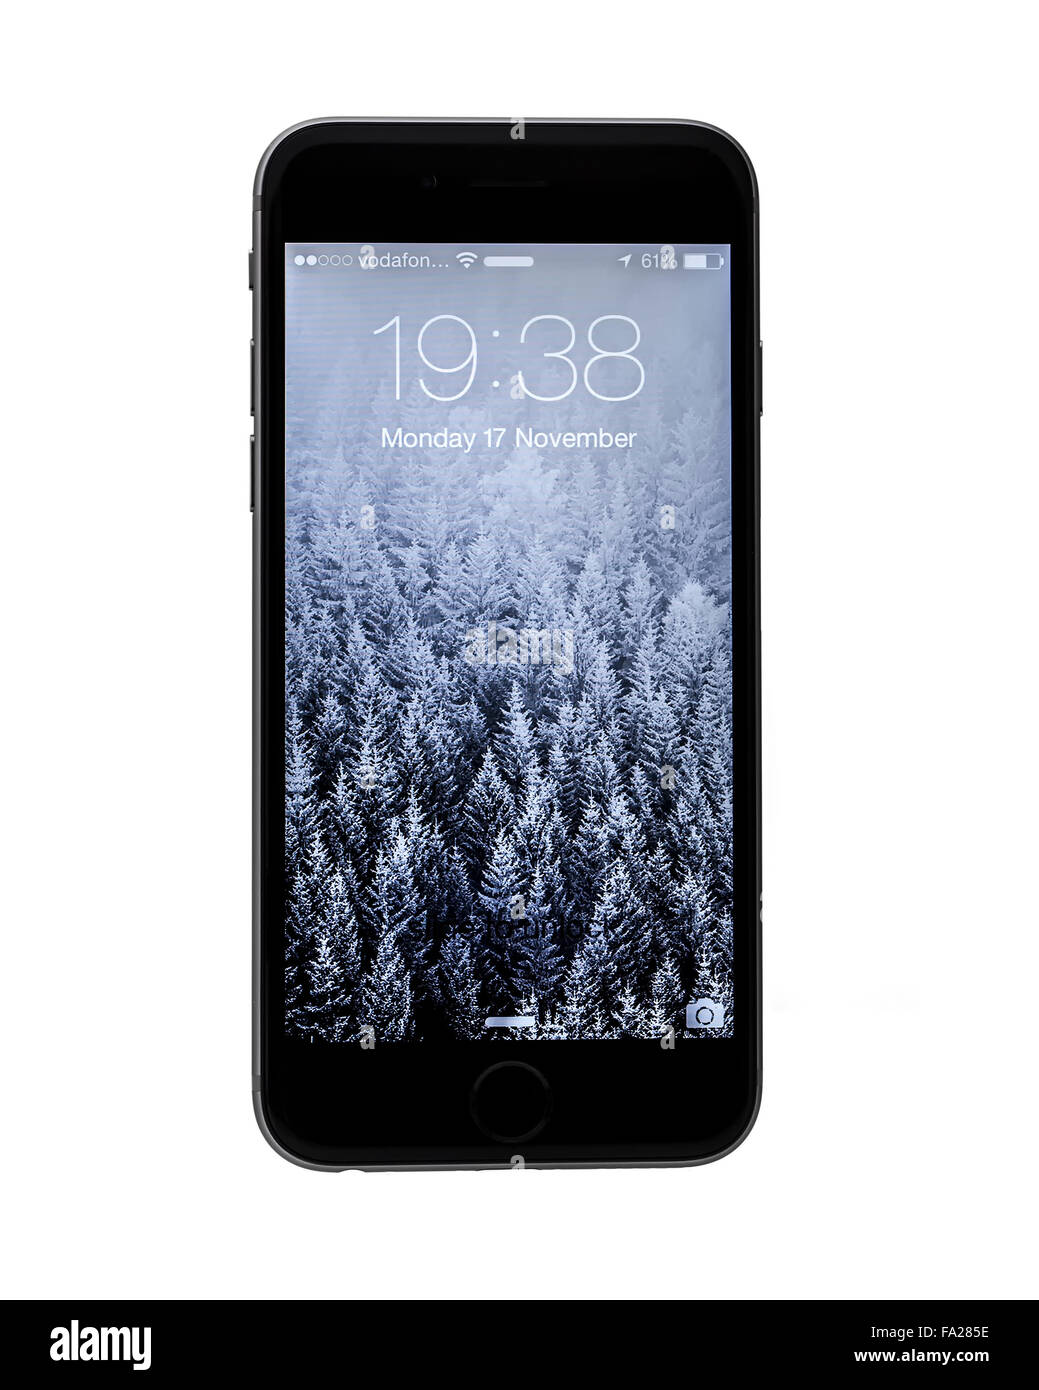 The New Apple iPhone 6 on a white background showing the IOS 8 Lock screen  Stock Photo - Alamy